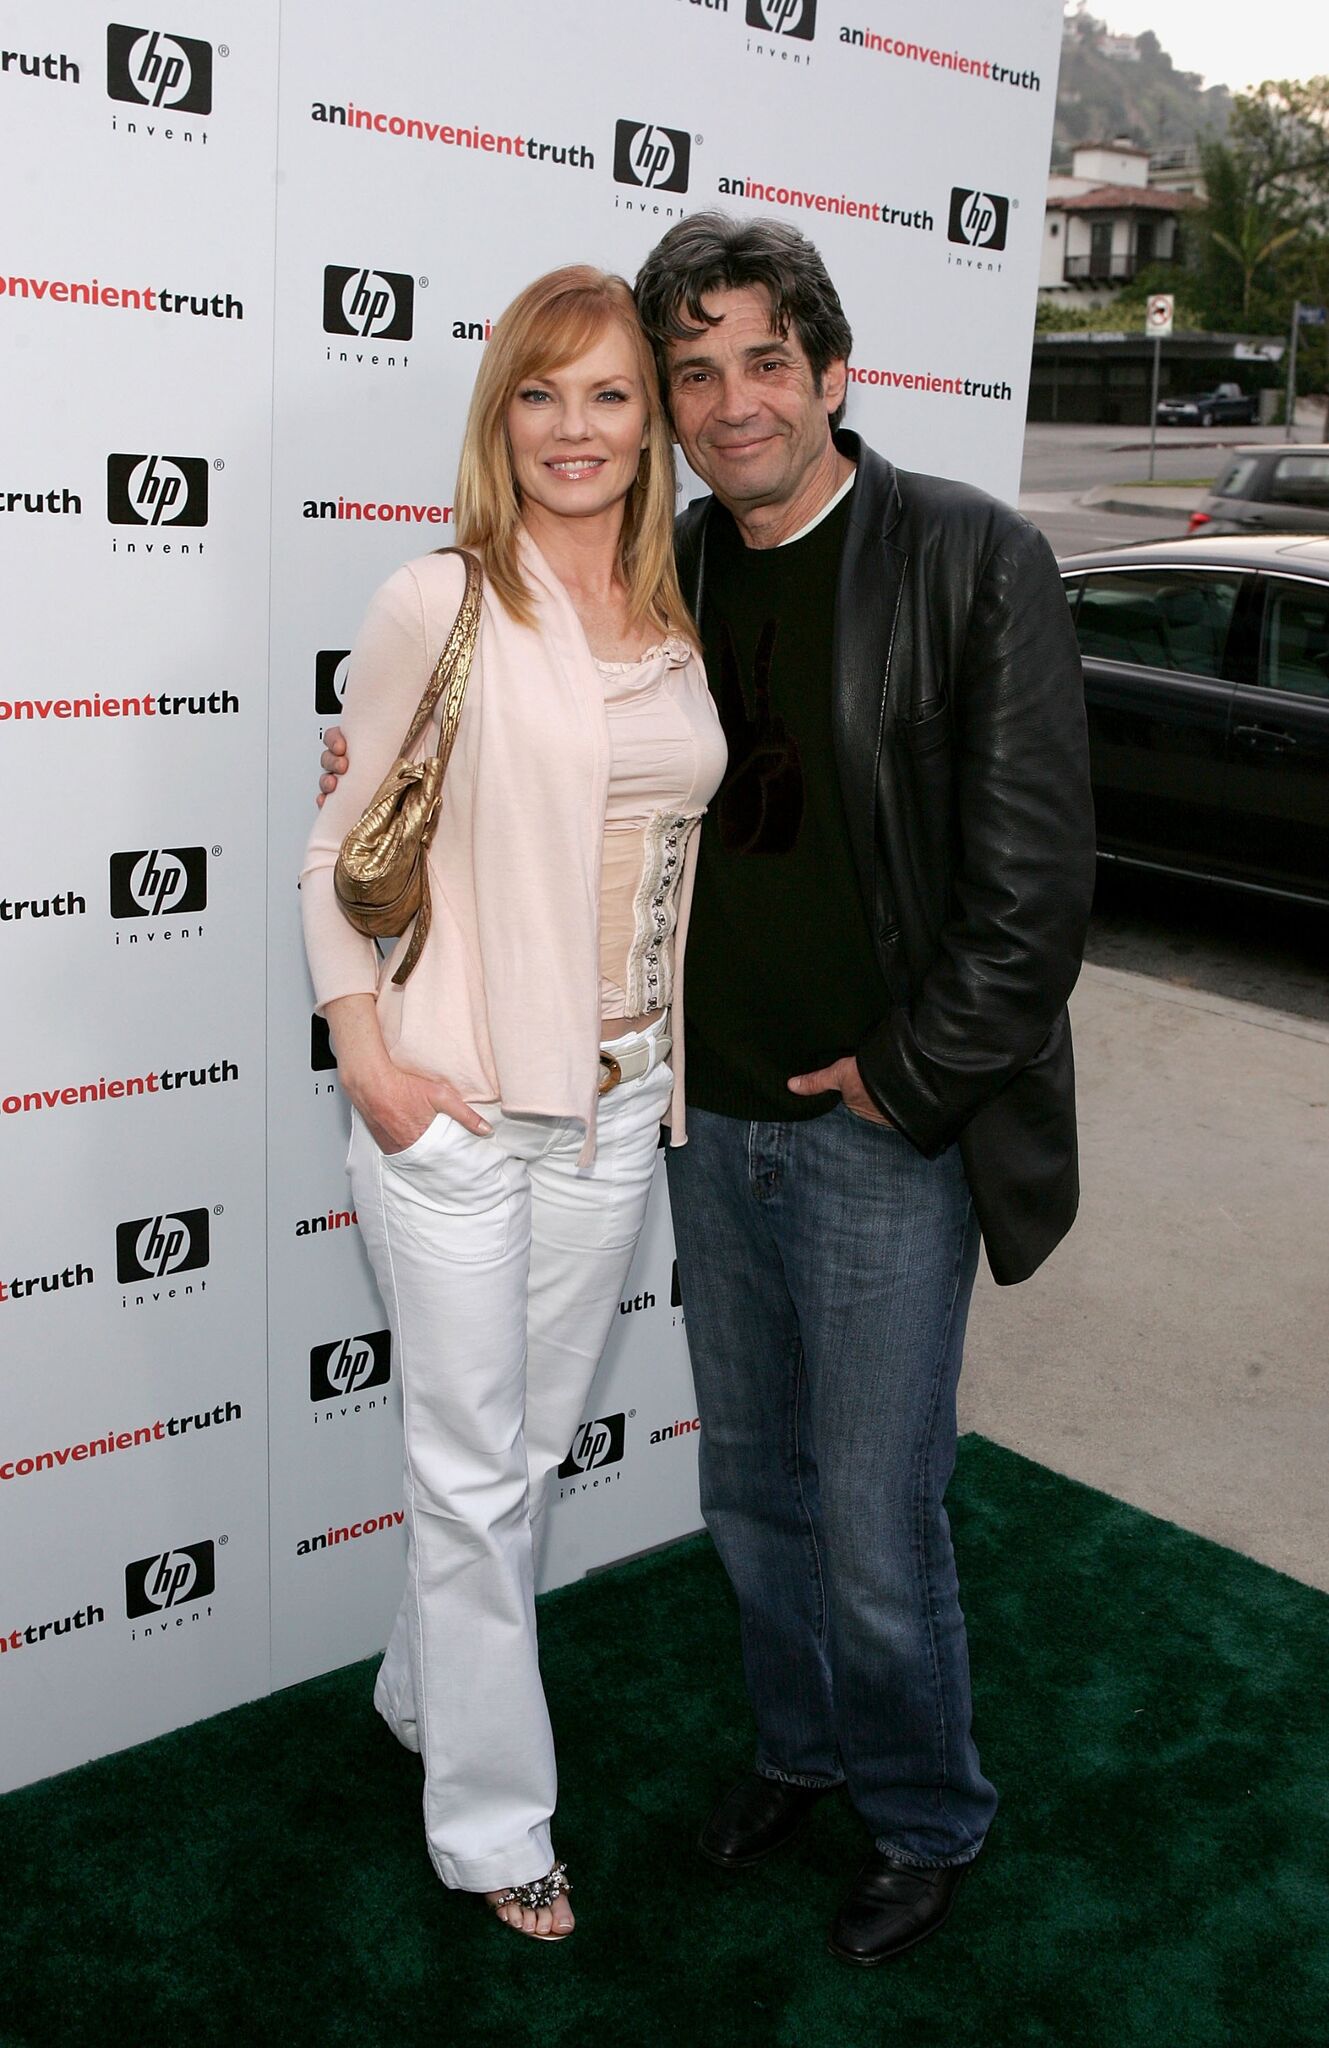 20 Facts about Marg Helgenberger Who Portrayed Catherine Willows on Fan